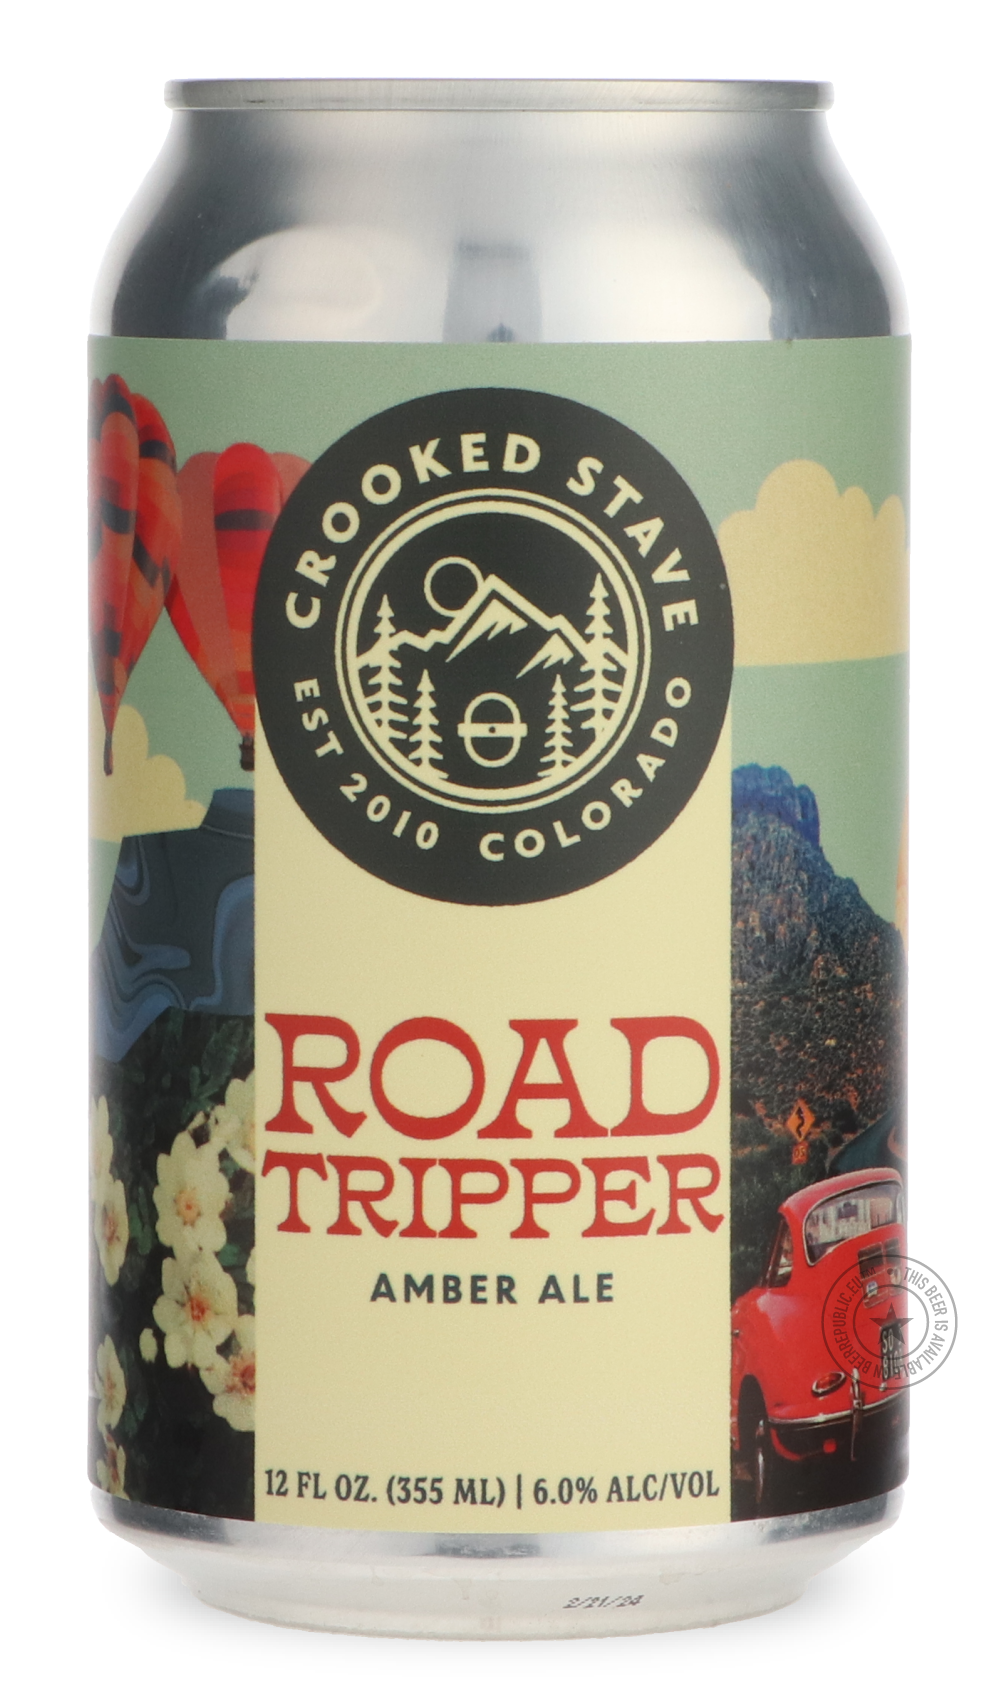 -Crooked Stave- Road Tripper-Brown & Dark- Only @ Beer Republic - The best online beer store for American & Canadian craft beer - Buy beer online from the USA and Canada - Bier online kopen - Amerikaans bier kopen - Craft beer store - Craft beer kopen - Amerikanisch bier kaufen - Bier online kaufen - Acheter biere online - IPA - Stout - Porter - New England IPA - Hazy IPA - Imperial Stout - Barrel Aged - Barrel Aged Imperial Stout - Brown - Dark beer - Blond - Blonde - Pilsner - Lager - Wheat - Weizen - Amb